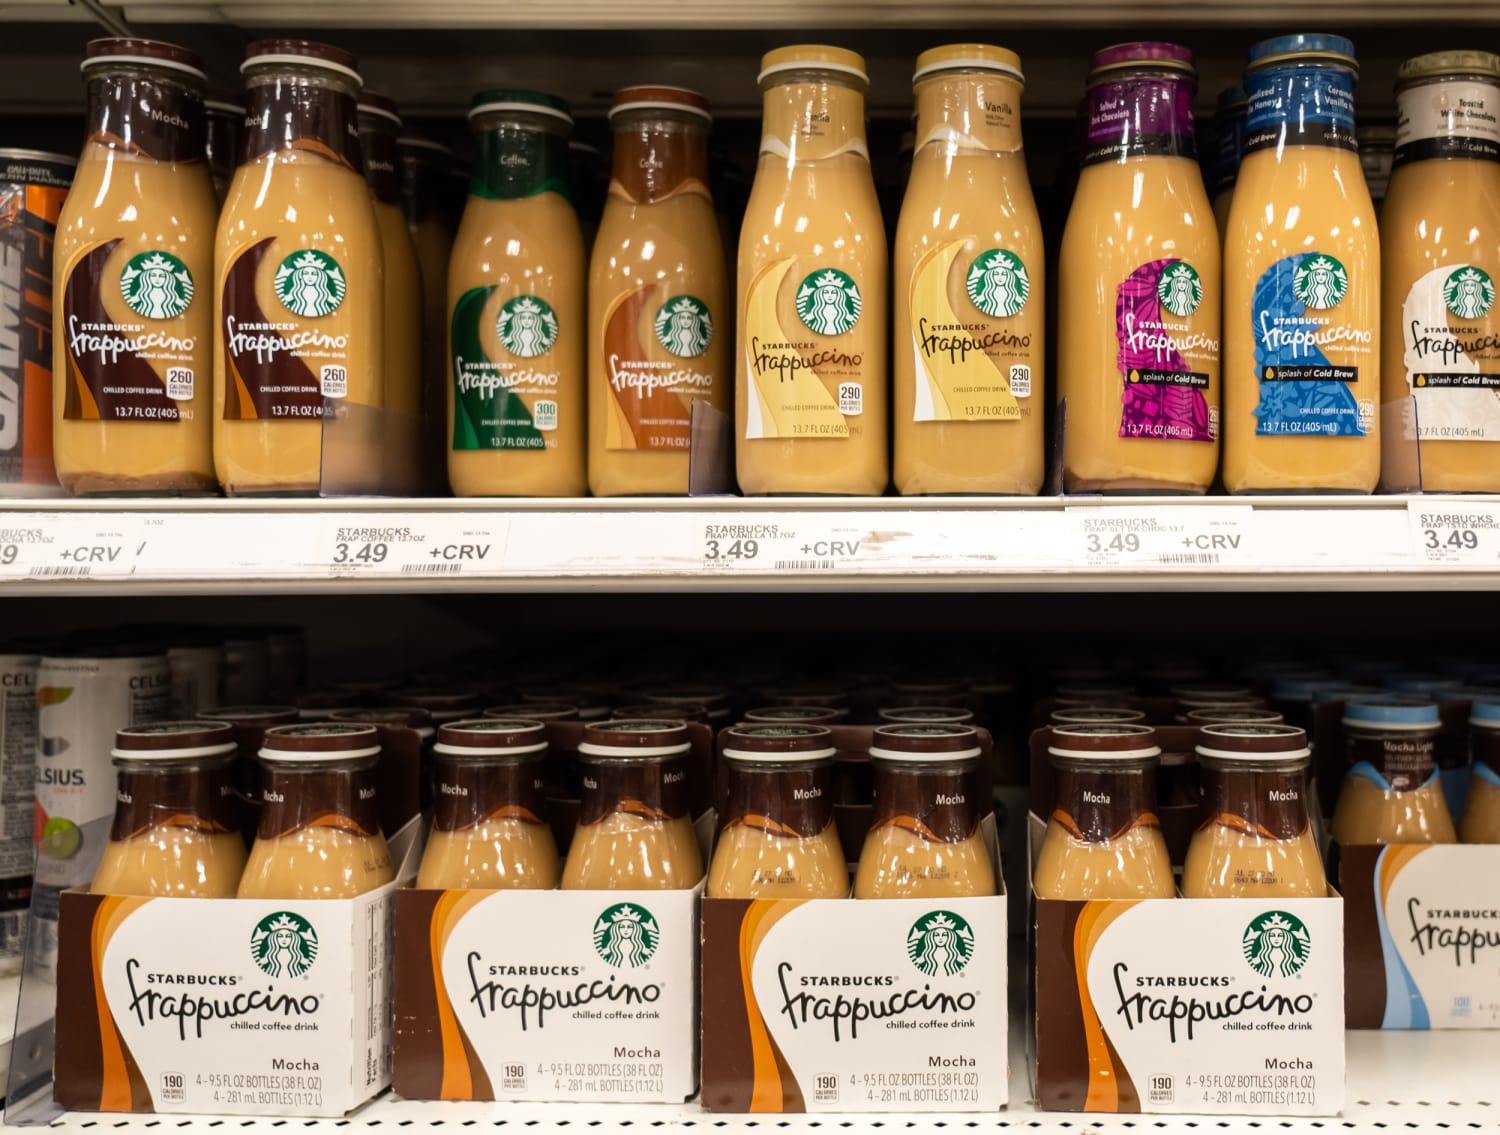 The Bottled Frappuccino